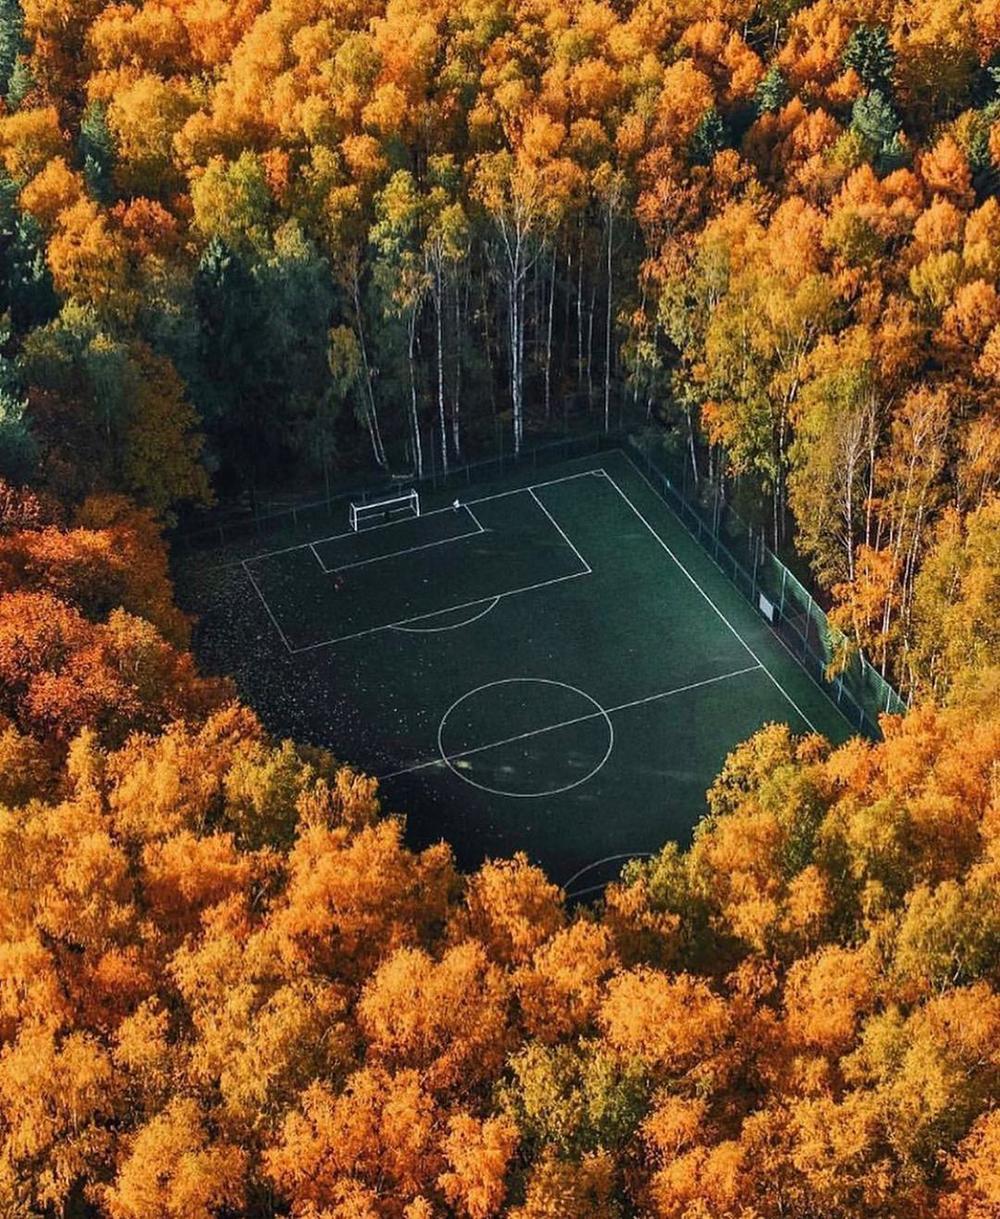 Field in Moscow, Russia